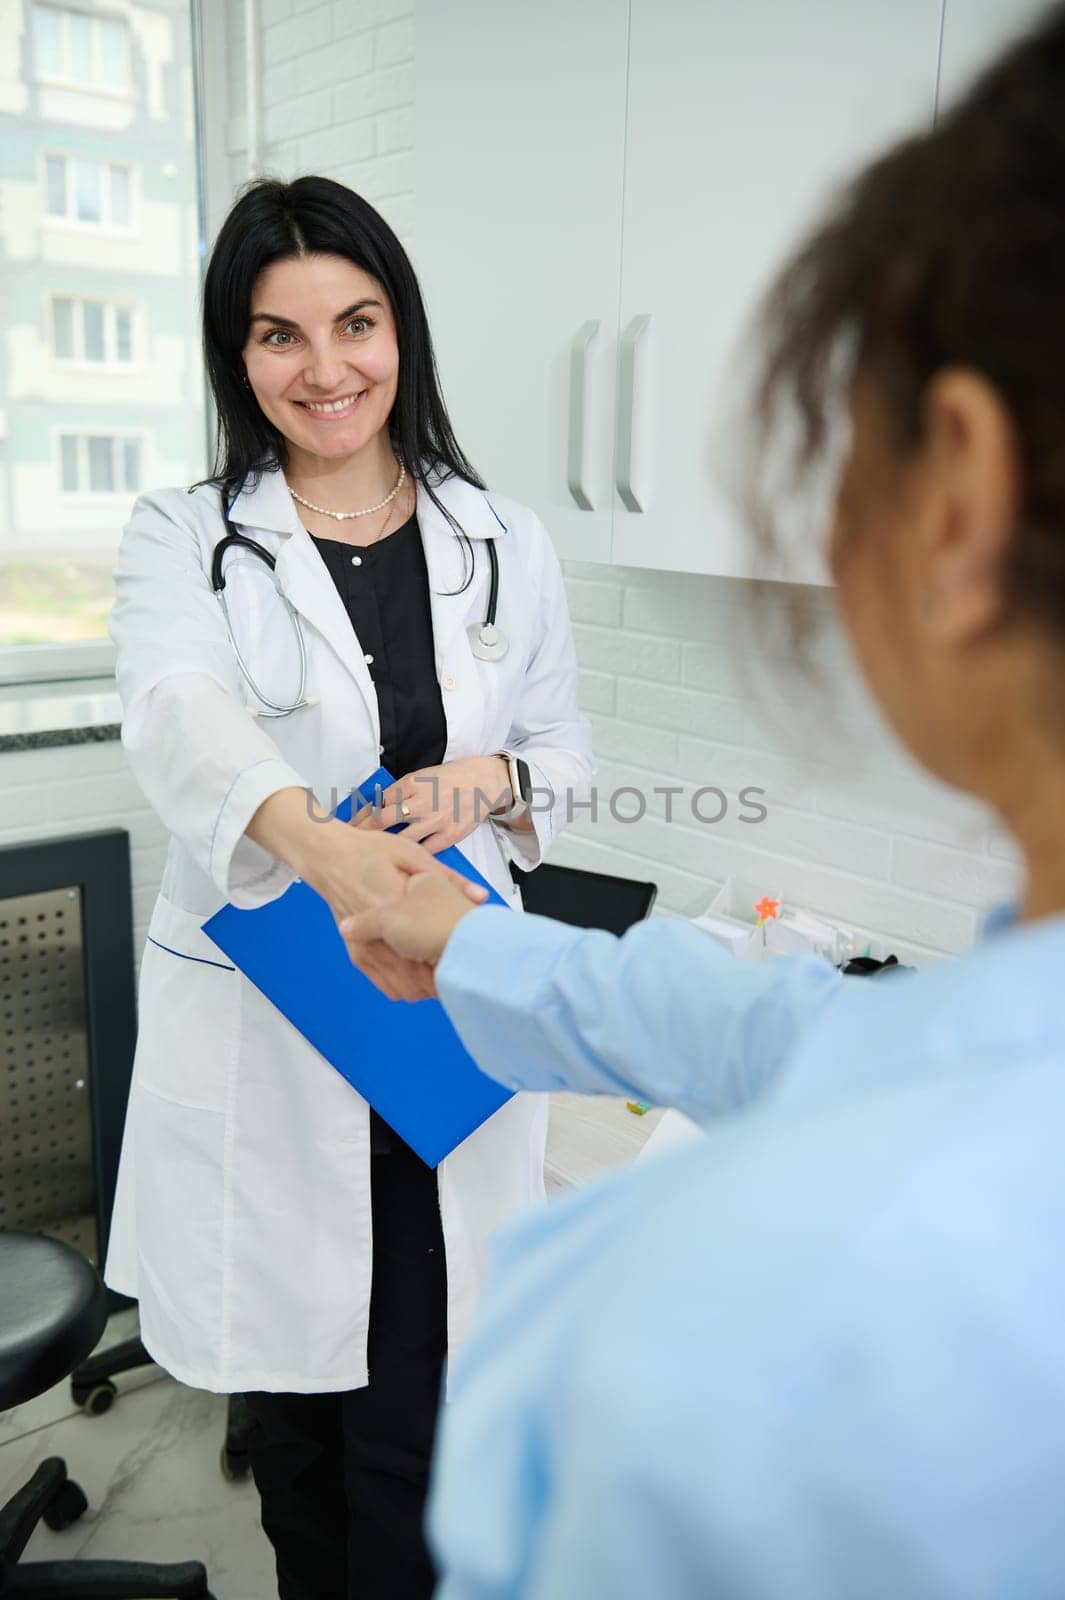 Charming pleasant female doctor holding clipboard, smiling, shaking hand and welcoming a pregnant patient in her office by artgf